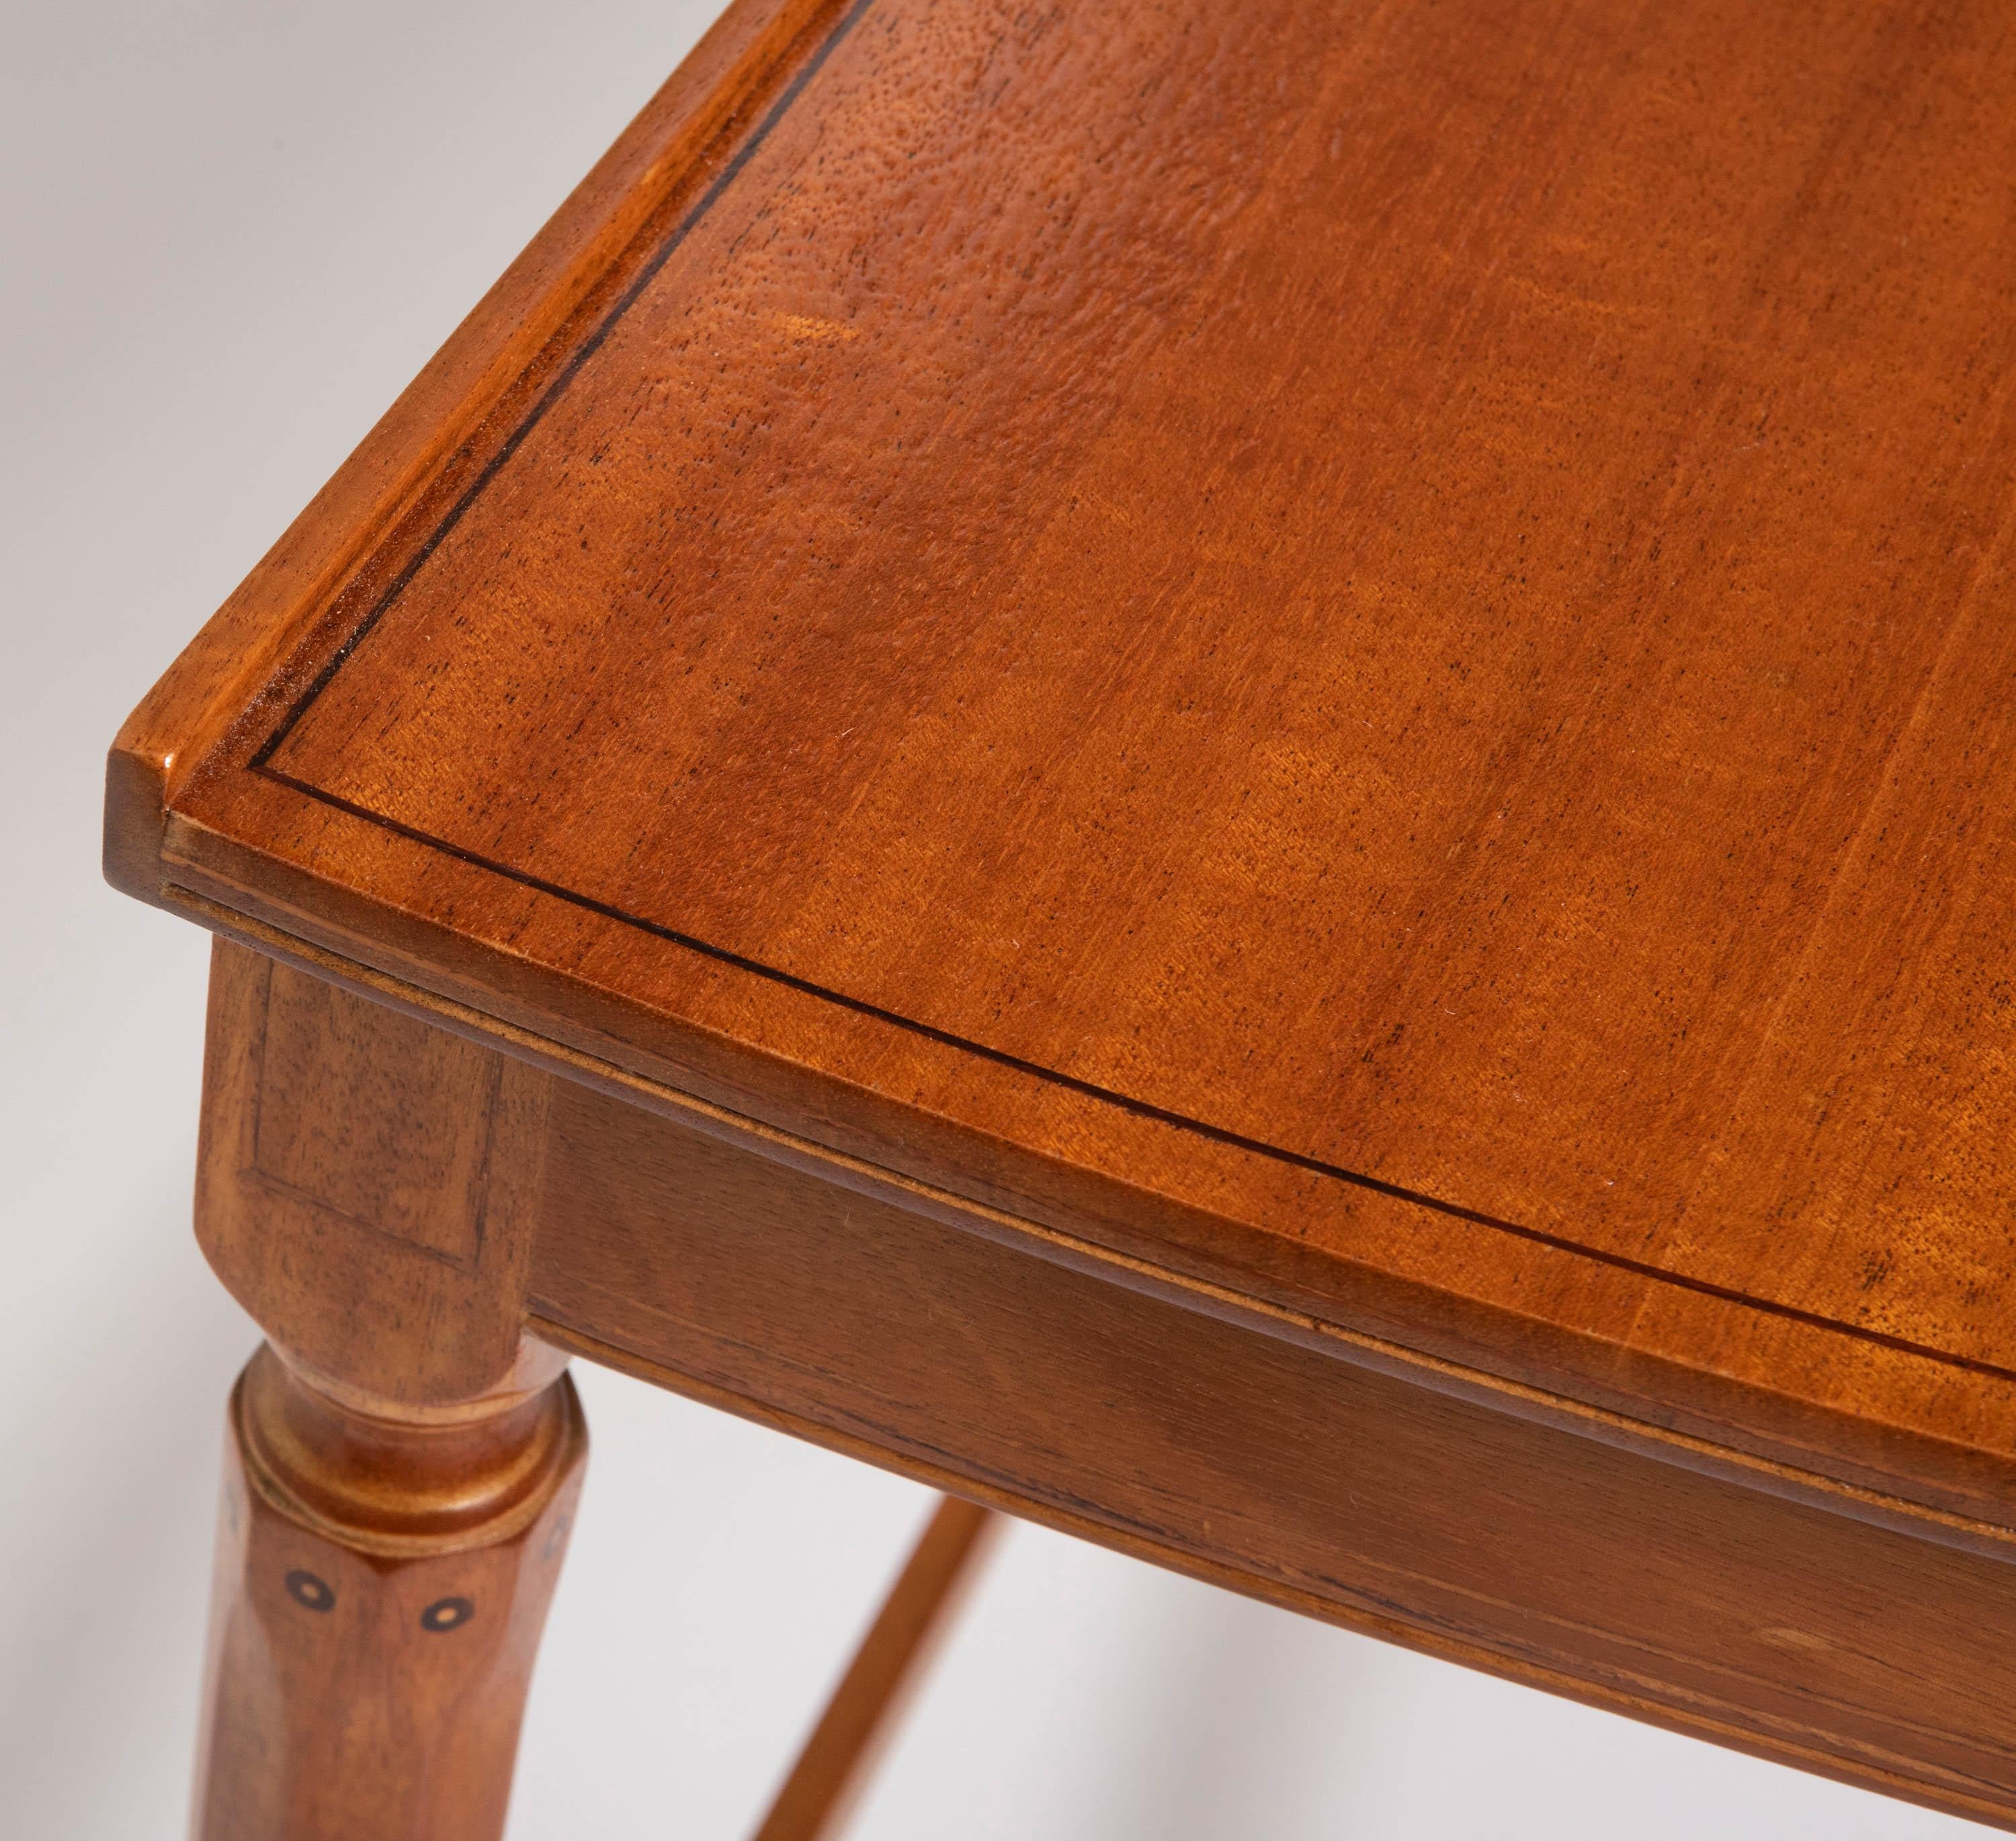 Pair of African Mahogany Side Tables by Edward Barnsley, England, circa 1956 For Sale 2